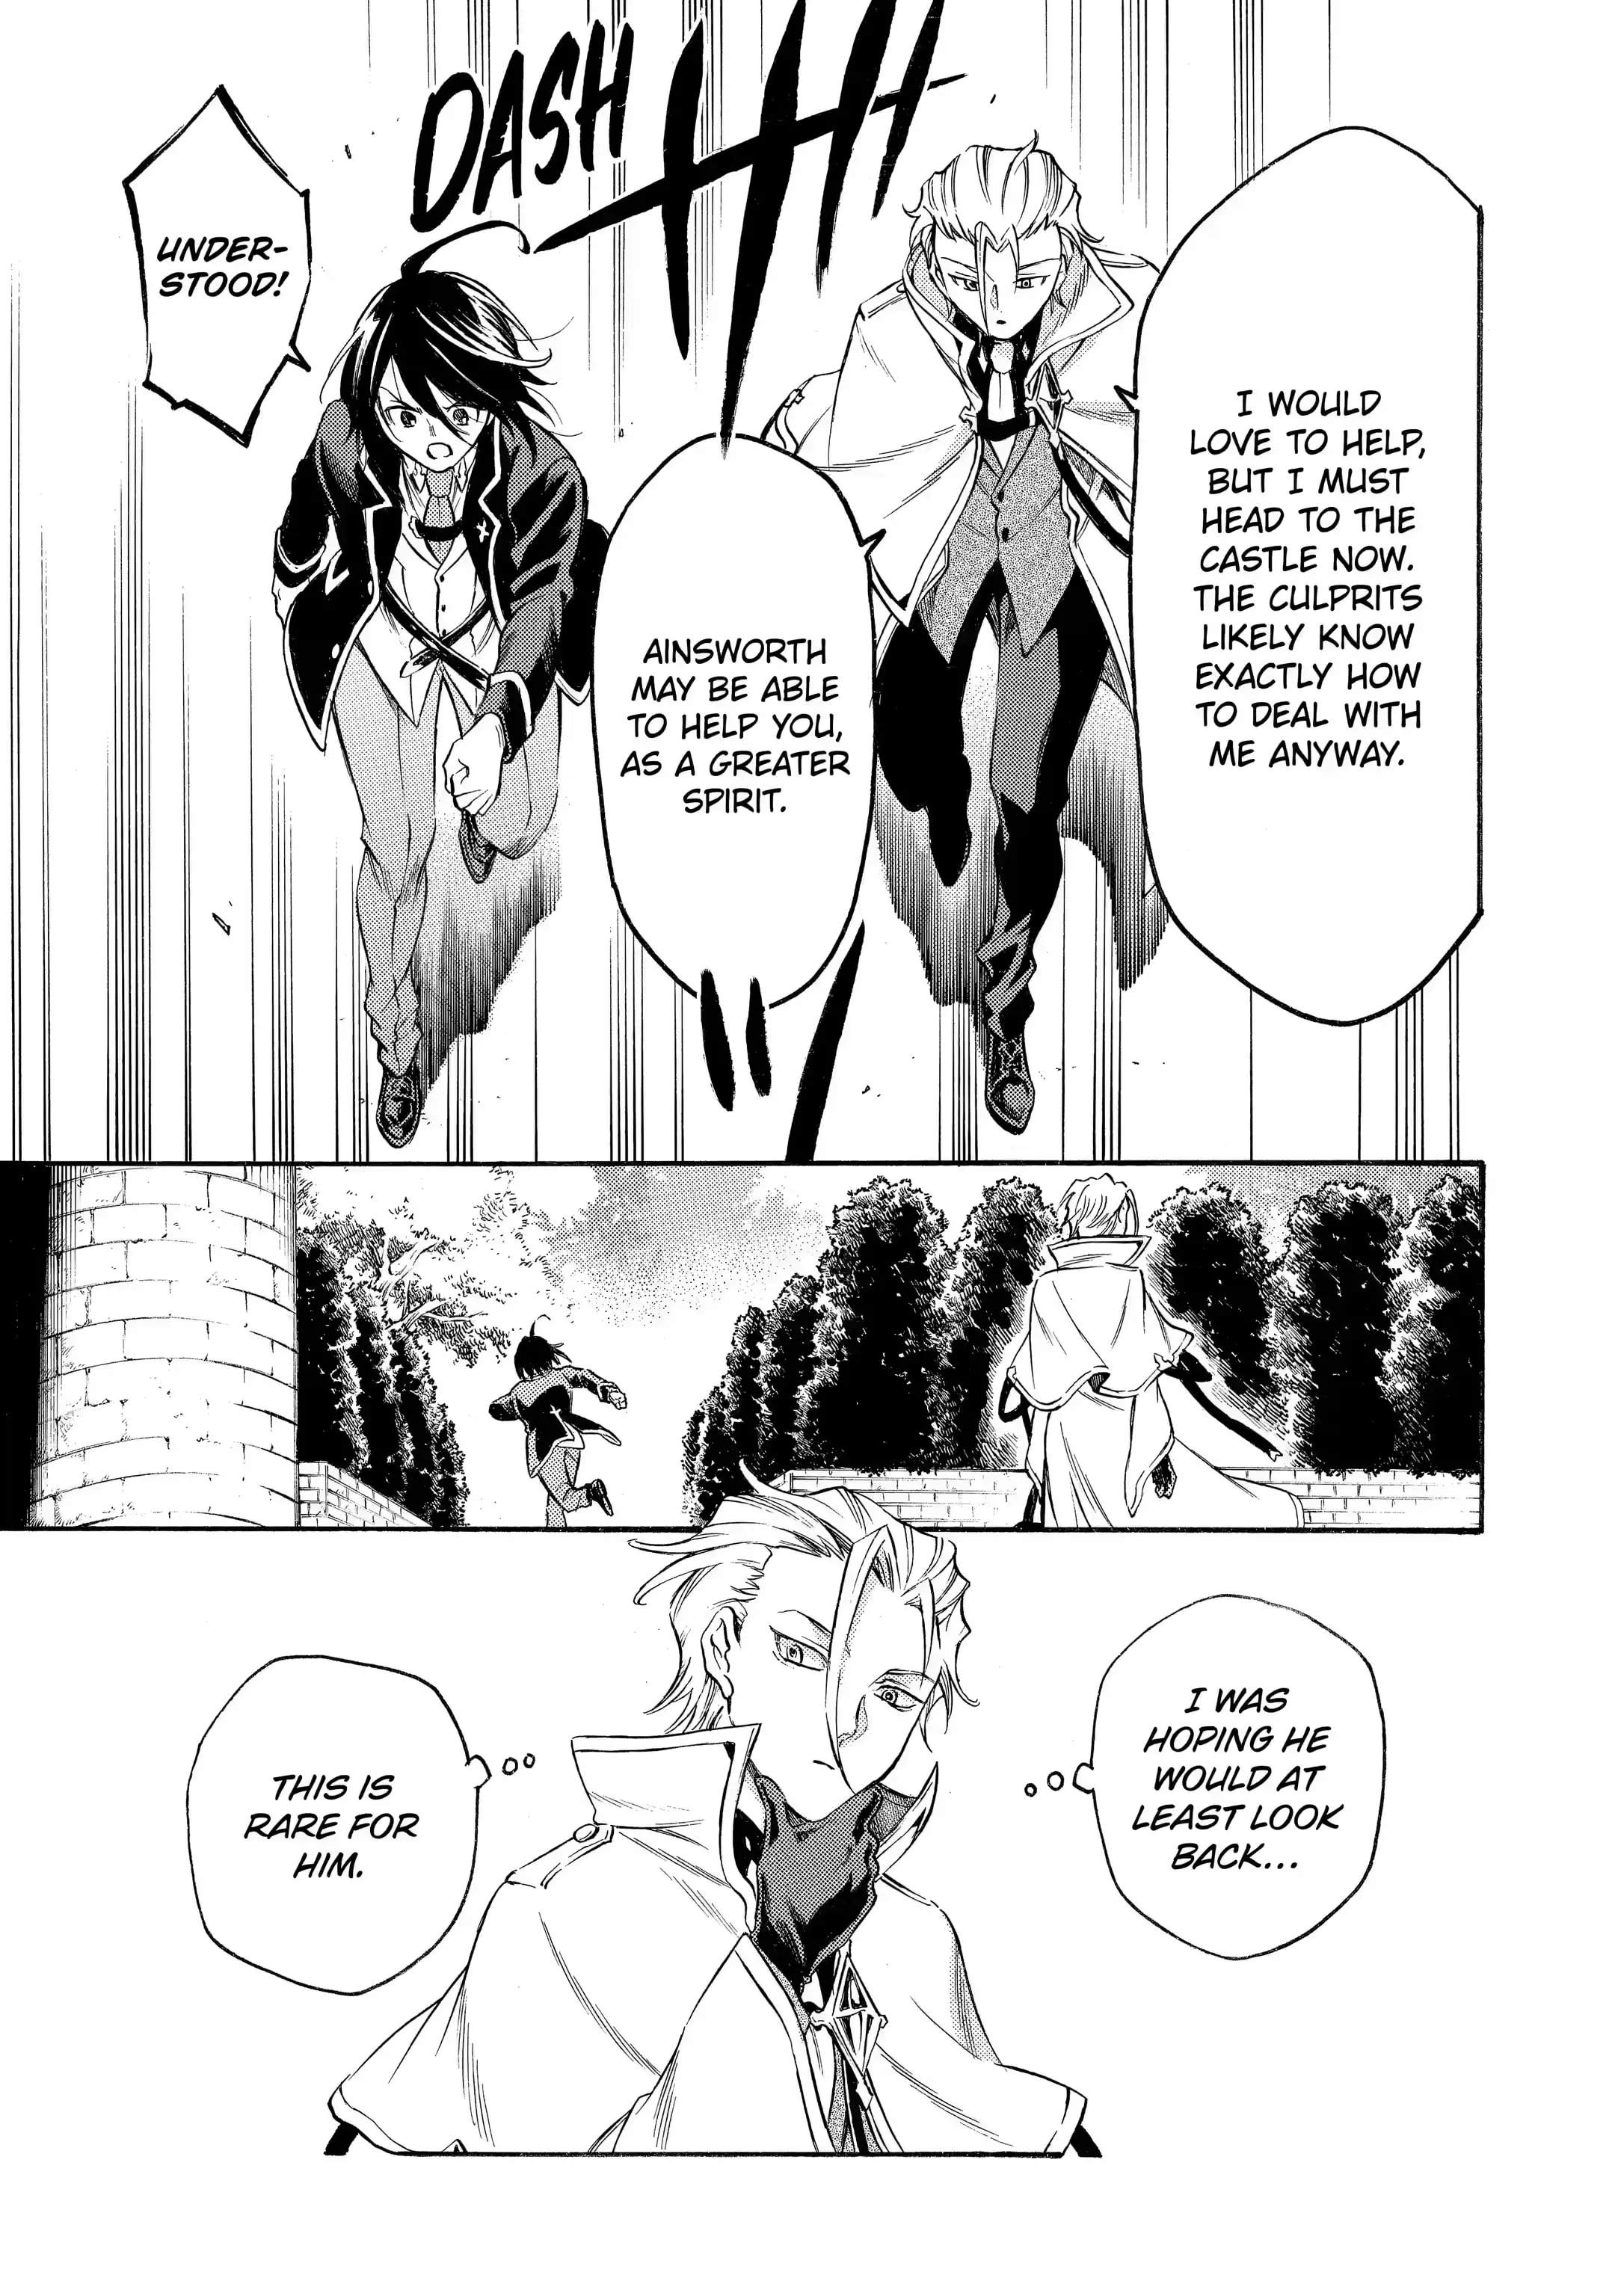 Reincarnation of the Unrivalled Time Mage: The Underachiever at the Magic Academy Turns Out to Be the Strongest Mage Who Controls Time! Chapter 9.1-eng-li - Page 4